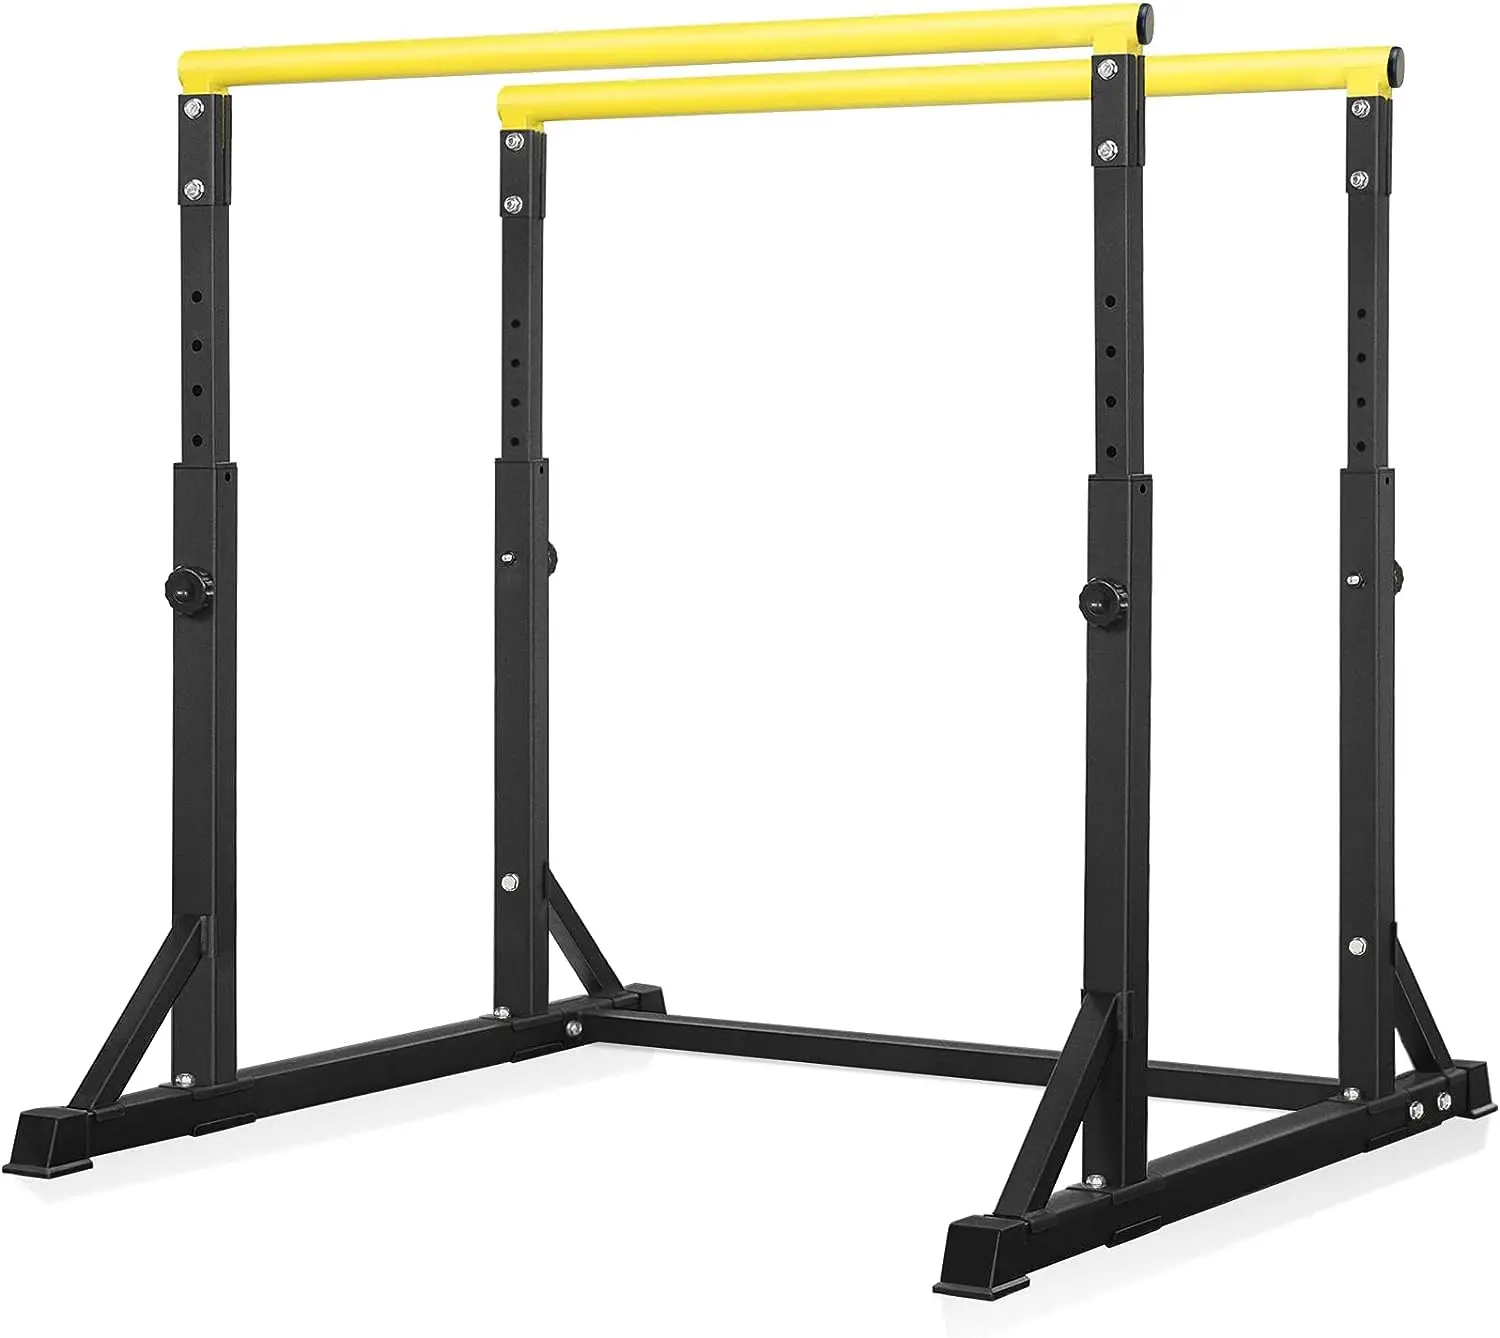 

Bar, Heavy Duty Dip Station with 7 Height Levels, 800lbs Adjustable Parallel Bars for Tricep Dips Pull-Ups L-Sits Calisthenics E